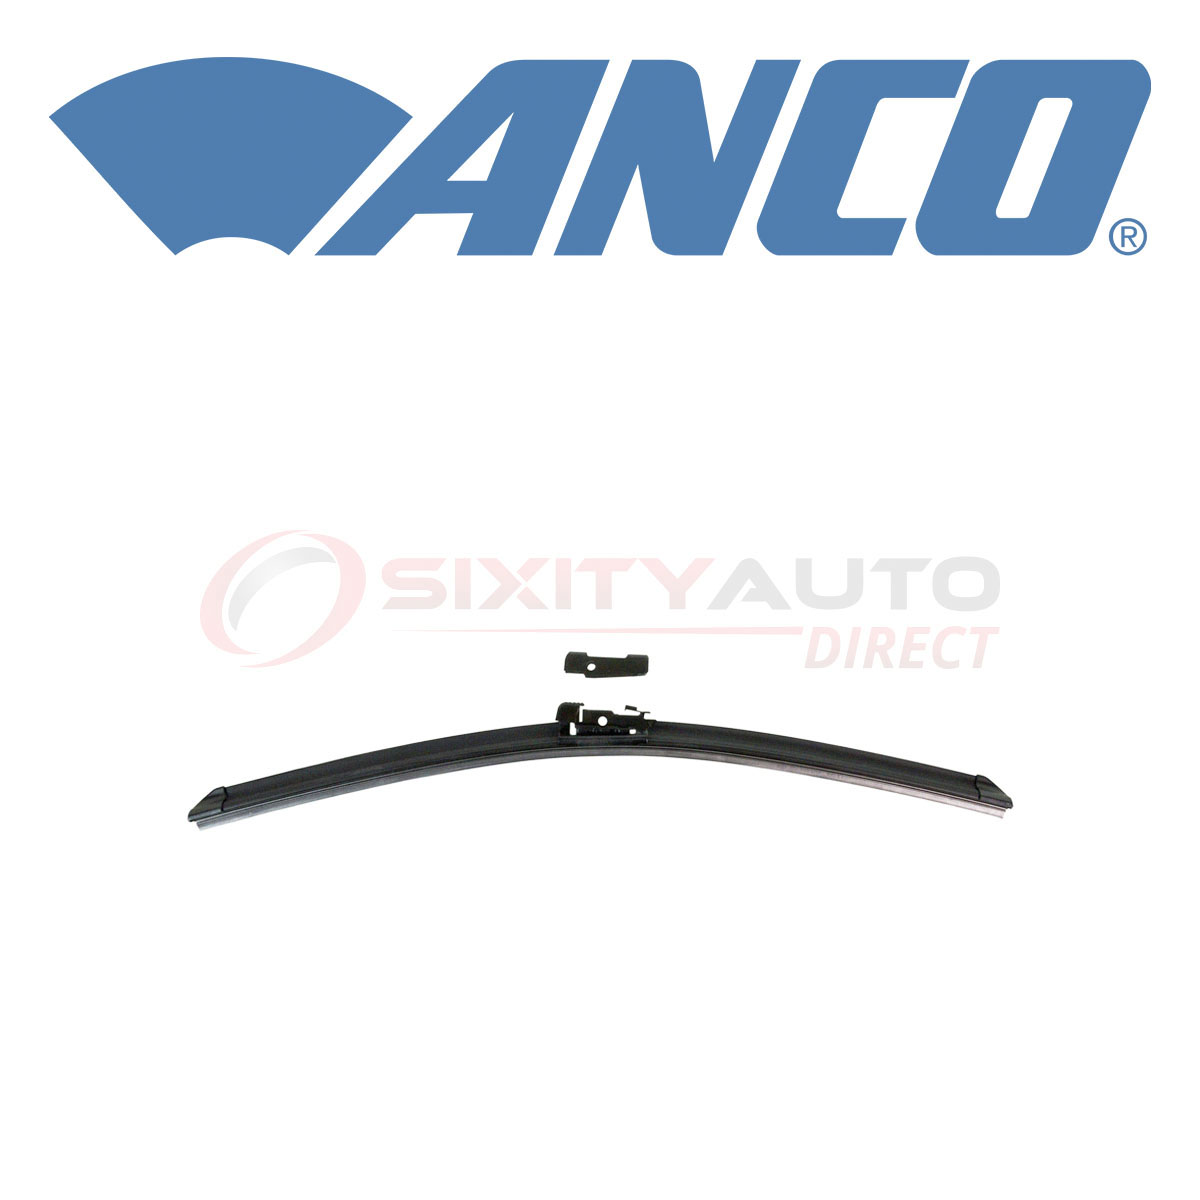 ANCO Countour Windshield Wiper Blade for 2017 GMC Acadia Limited 3.6L V6 - xj | eBay 2017 Gmc Acadia Rear Wiper Blade Replacement